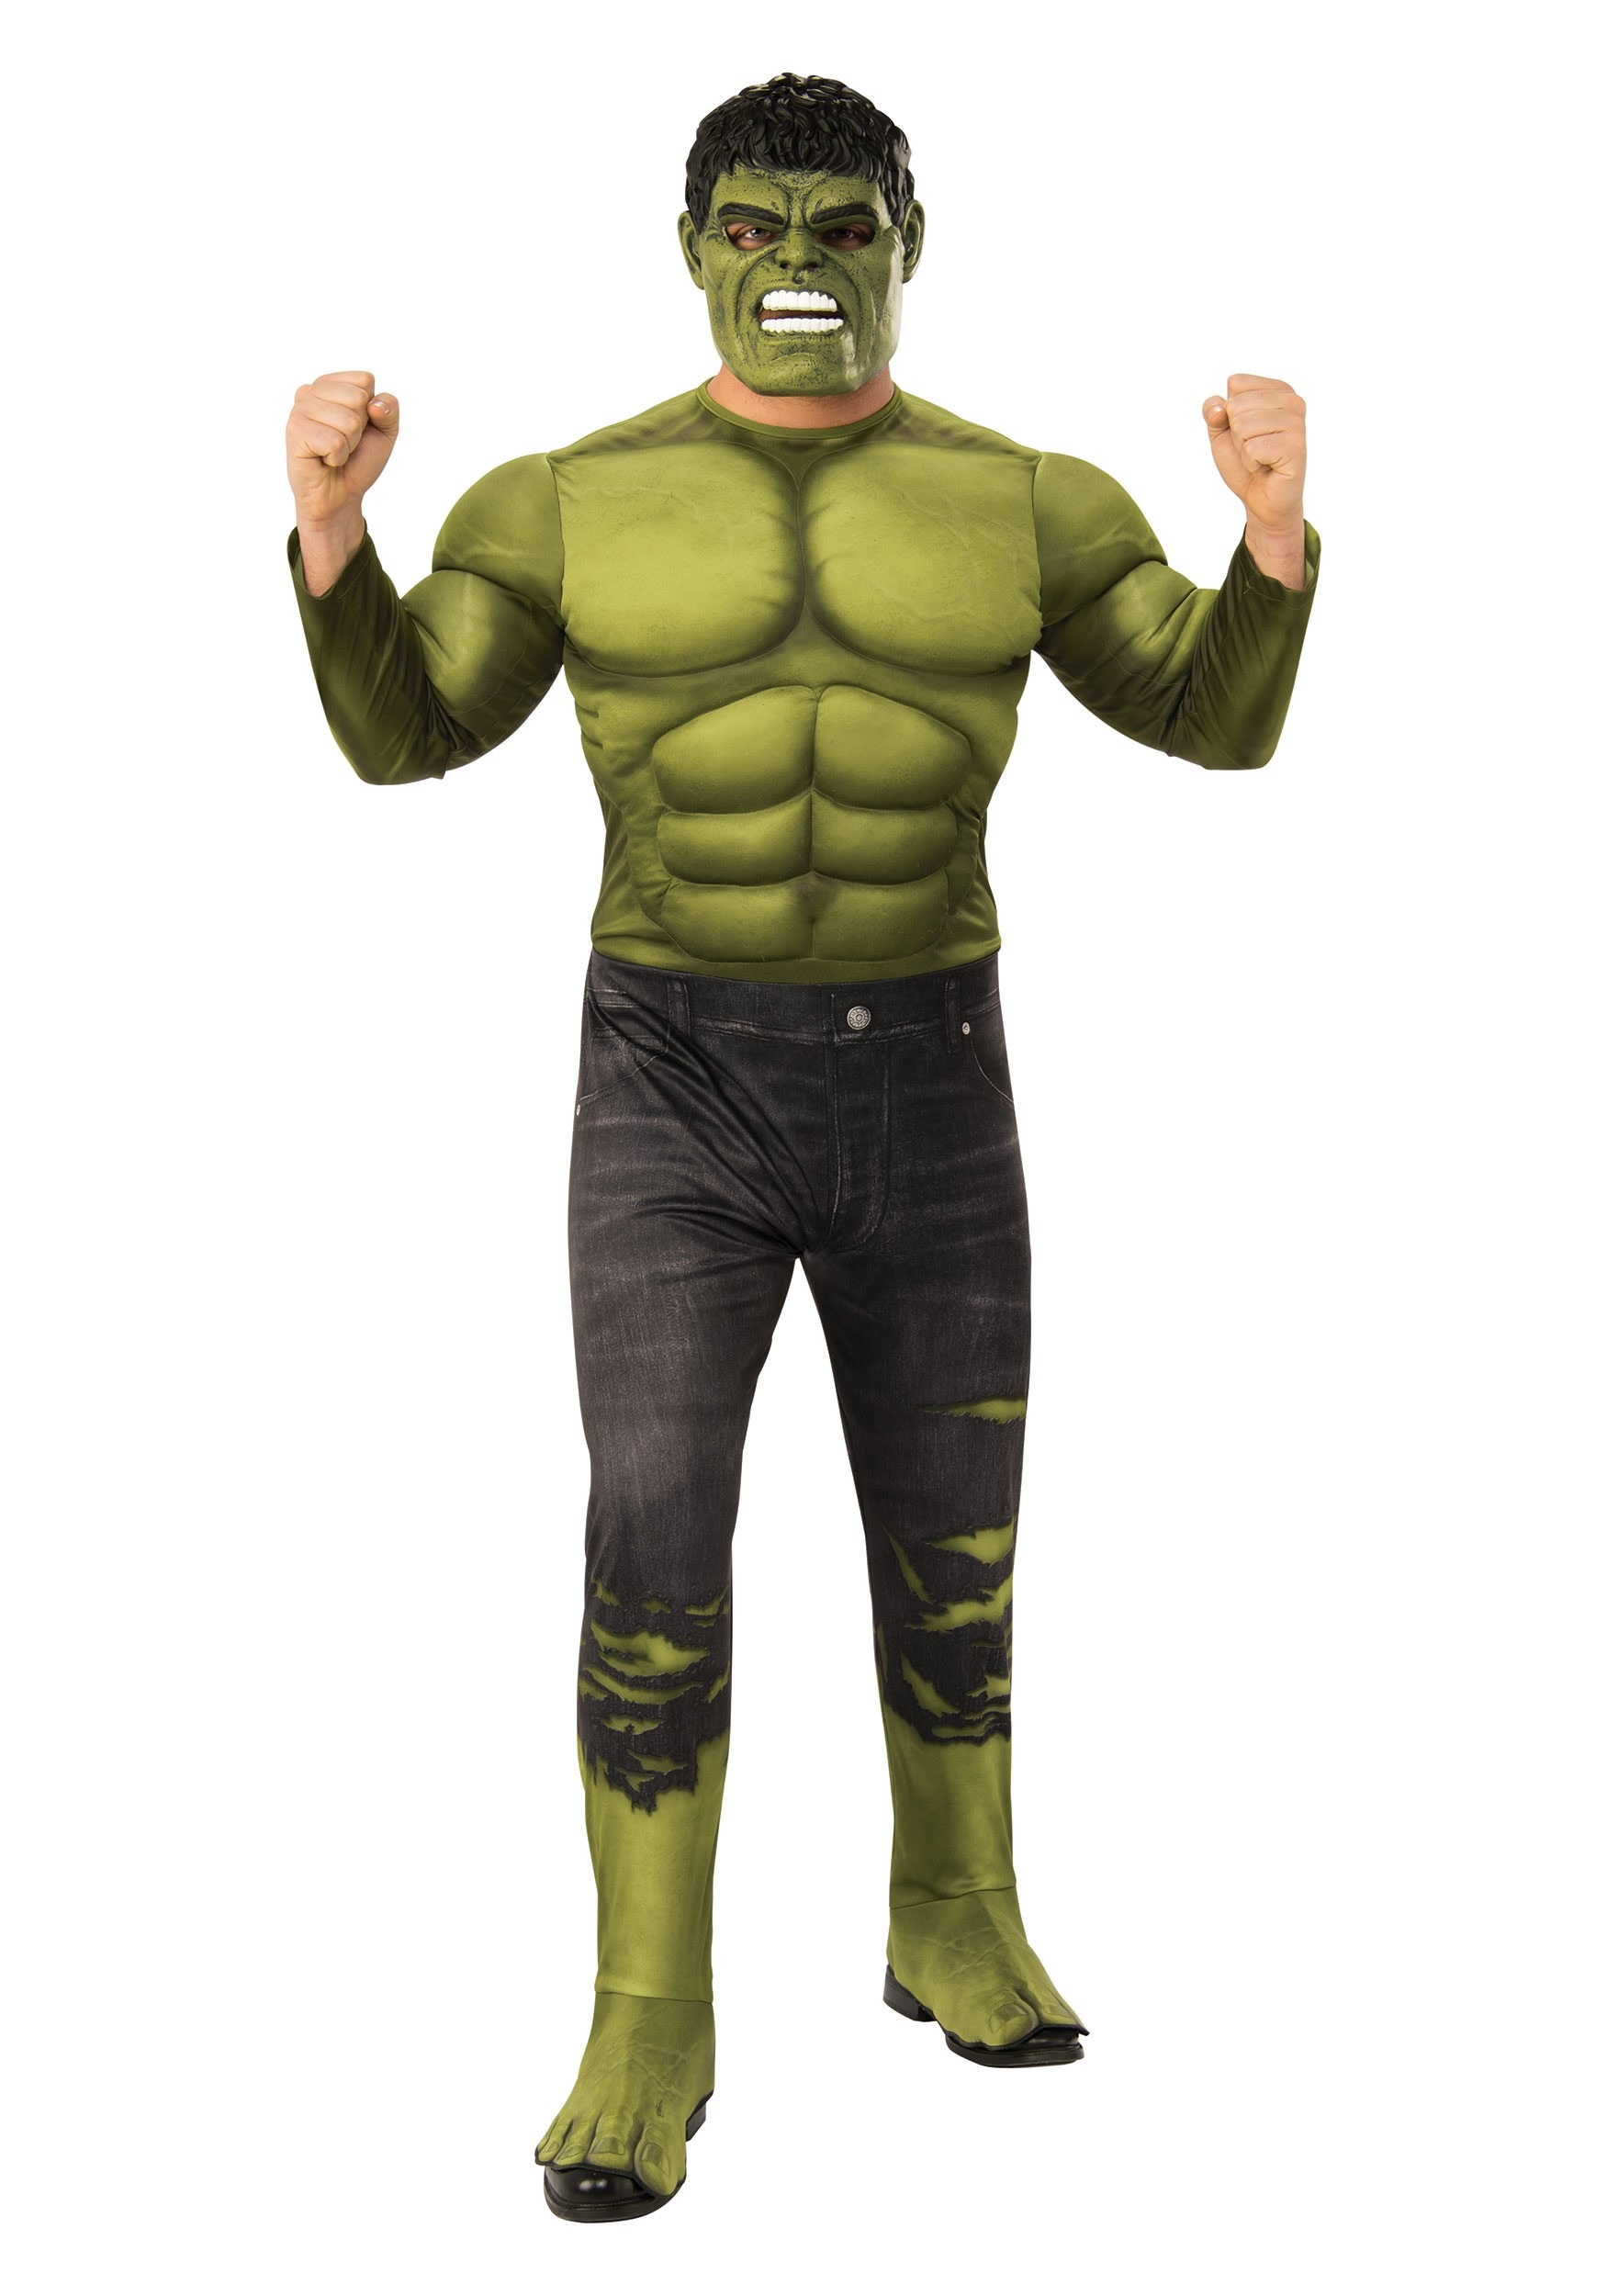 Avengers End Game Incredible Hulk Muscle Adult Costume Marvel Standard New 953 